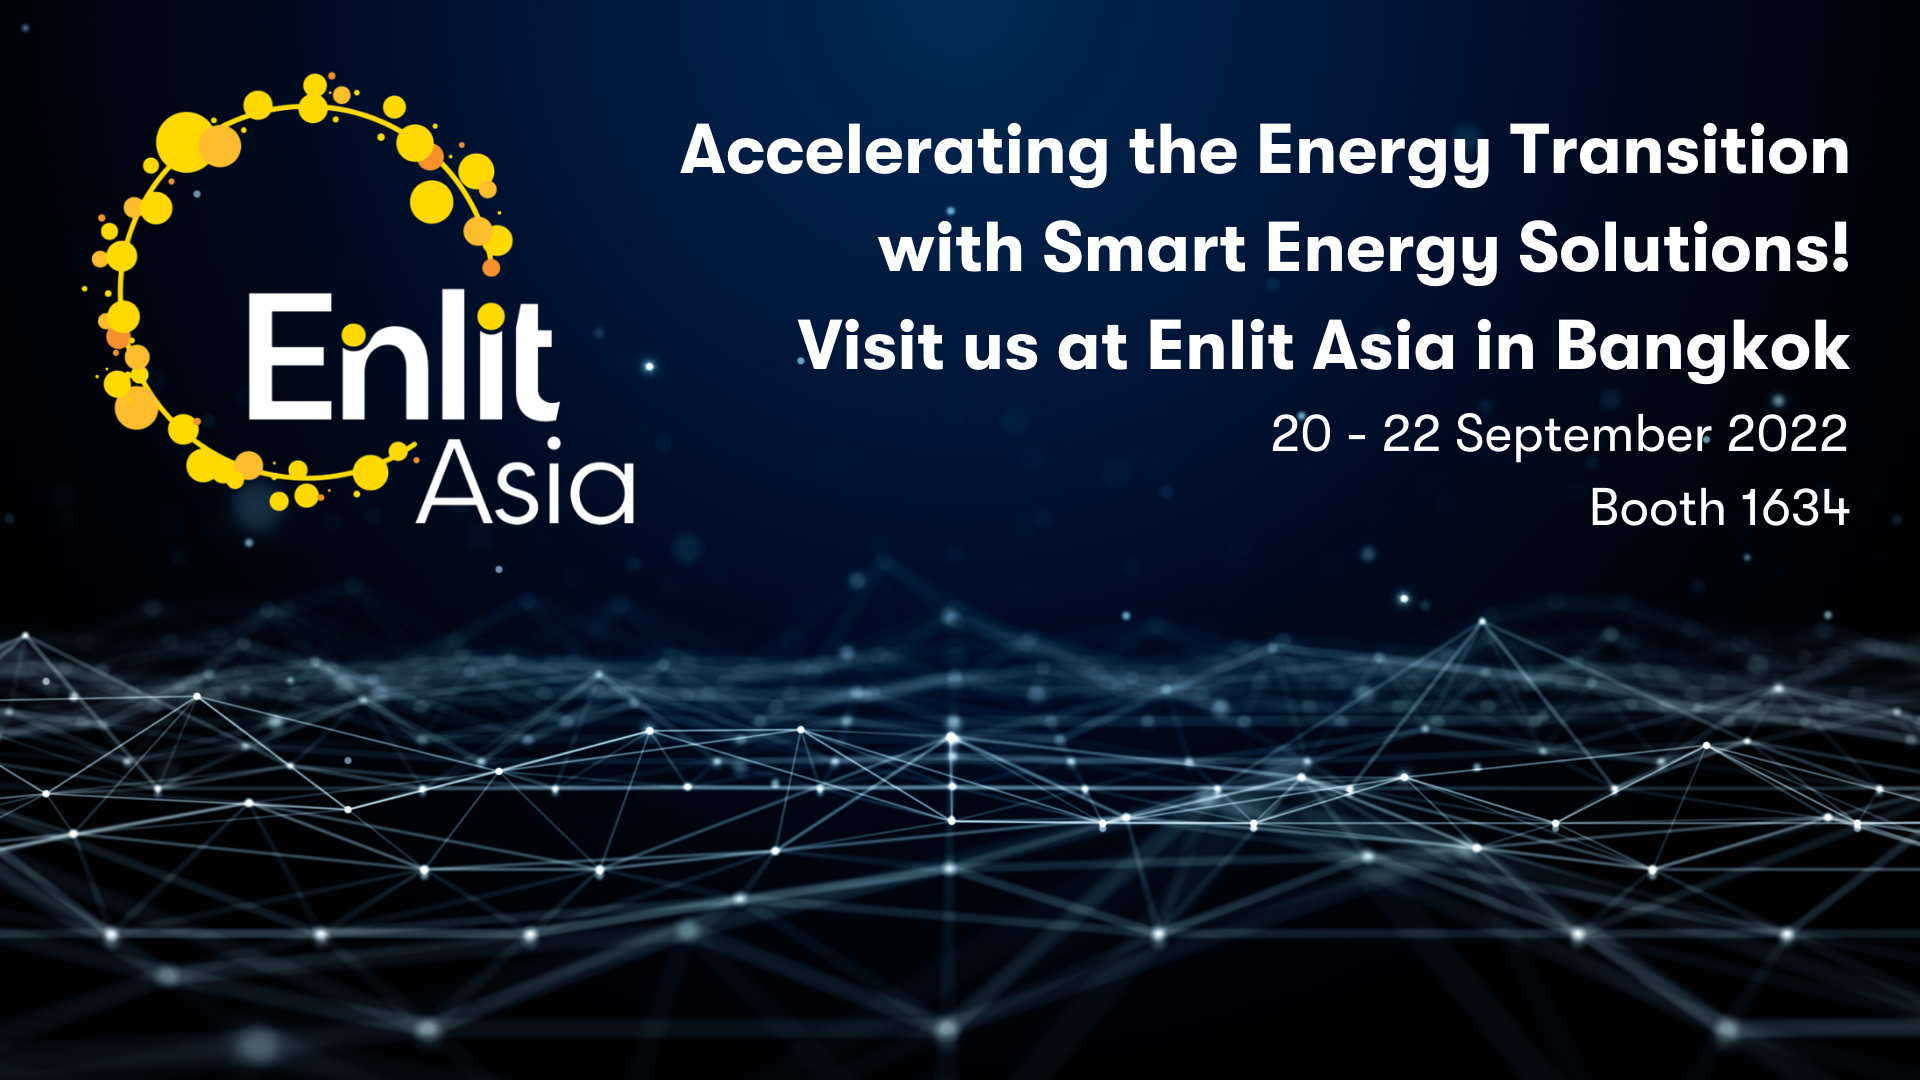 uploads/pics/https://solutions.iqony.energy/uploads/pics/Accelerating_the_Energy_Transition_with_Smart_Digital_Solutions_Visit_us_at_Enlit_Asia_in_Bangkok__1__02.png